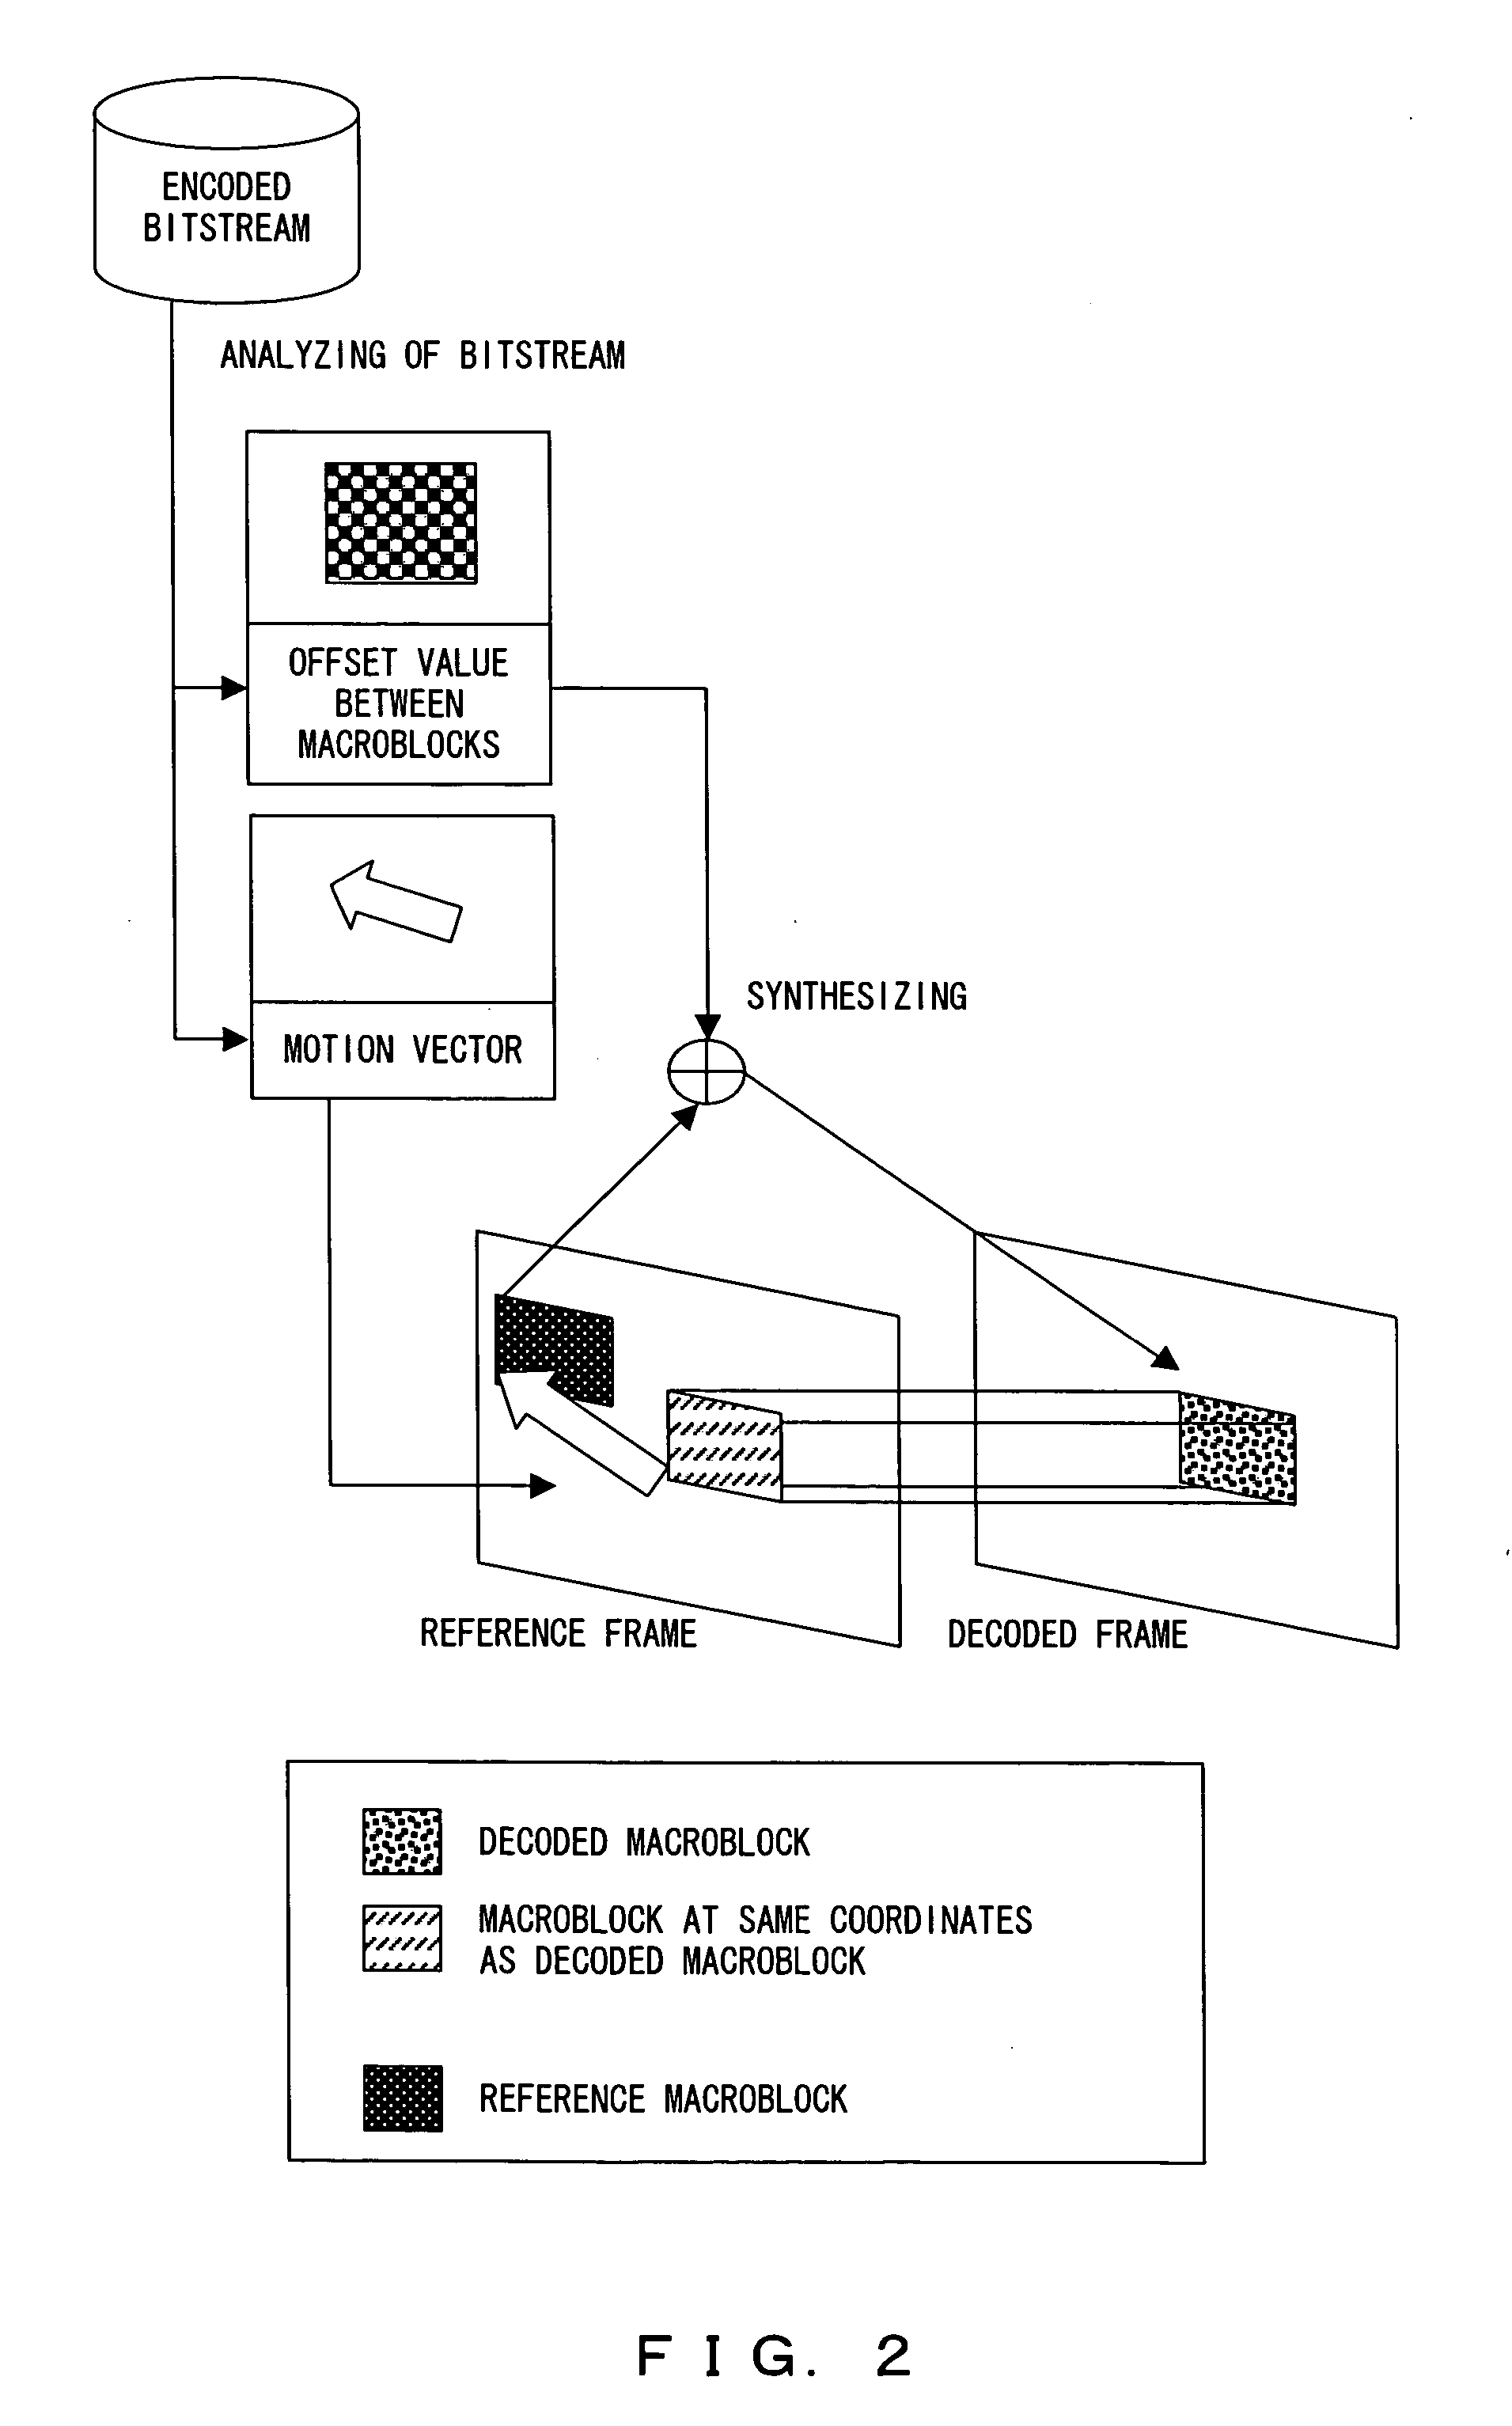 Decoding device and decoding program for video image data